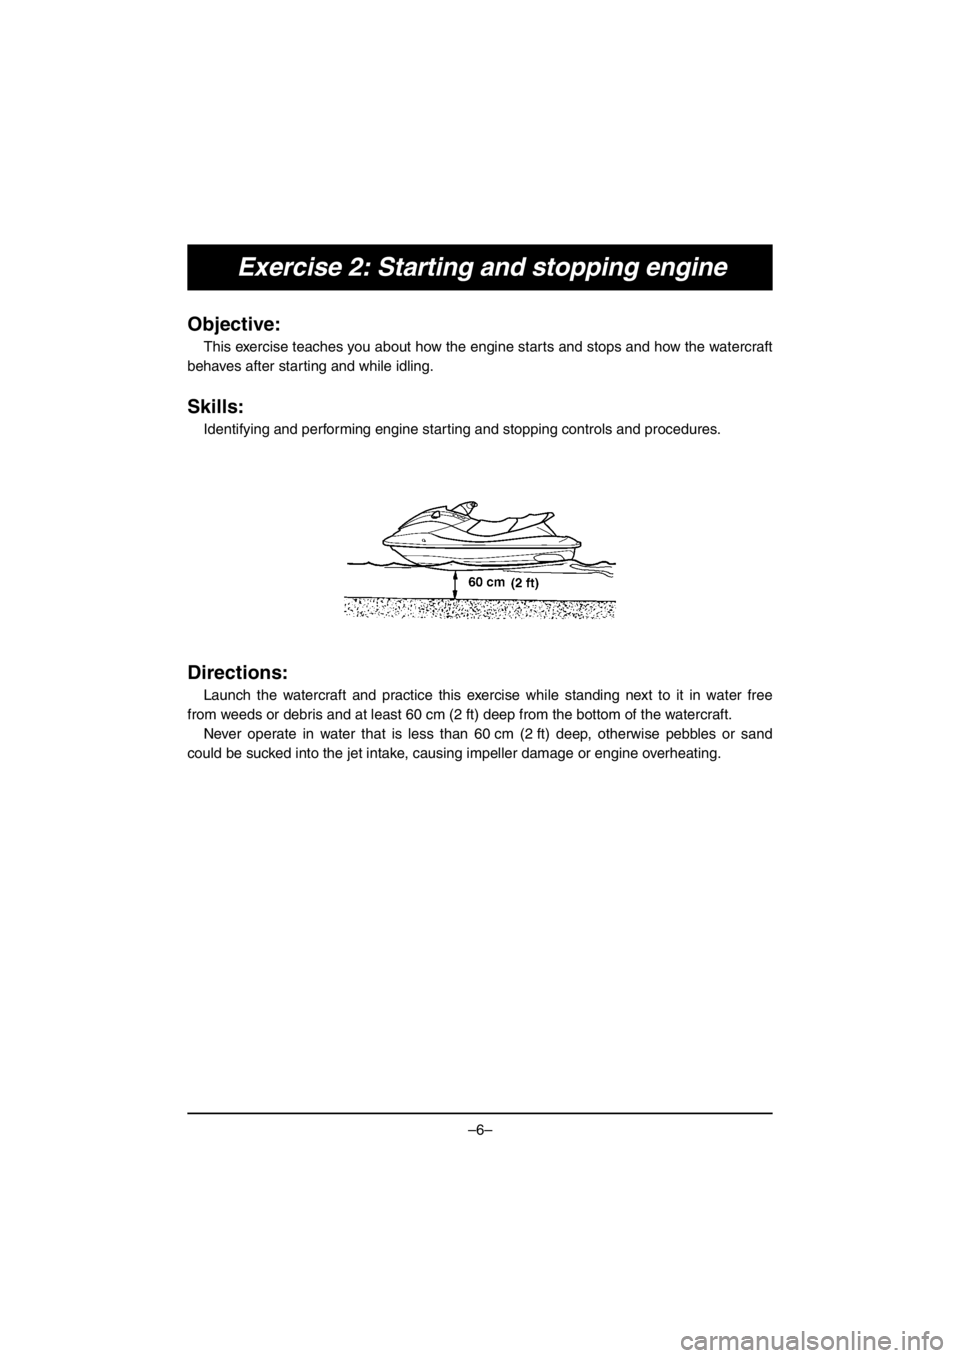 YAMAHA V1 2016  Manuale de Empleo (in Spanish) –6–
Exercise 2: Starting and stopping engine
Objective:
This exercise teaches you about how the engine starts and stops and how the watercraft
behaves after starting and while idling.
Skills:
Iden